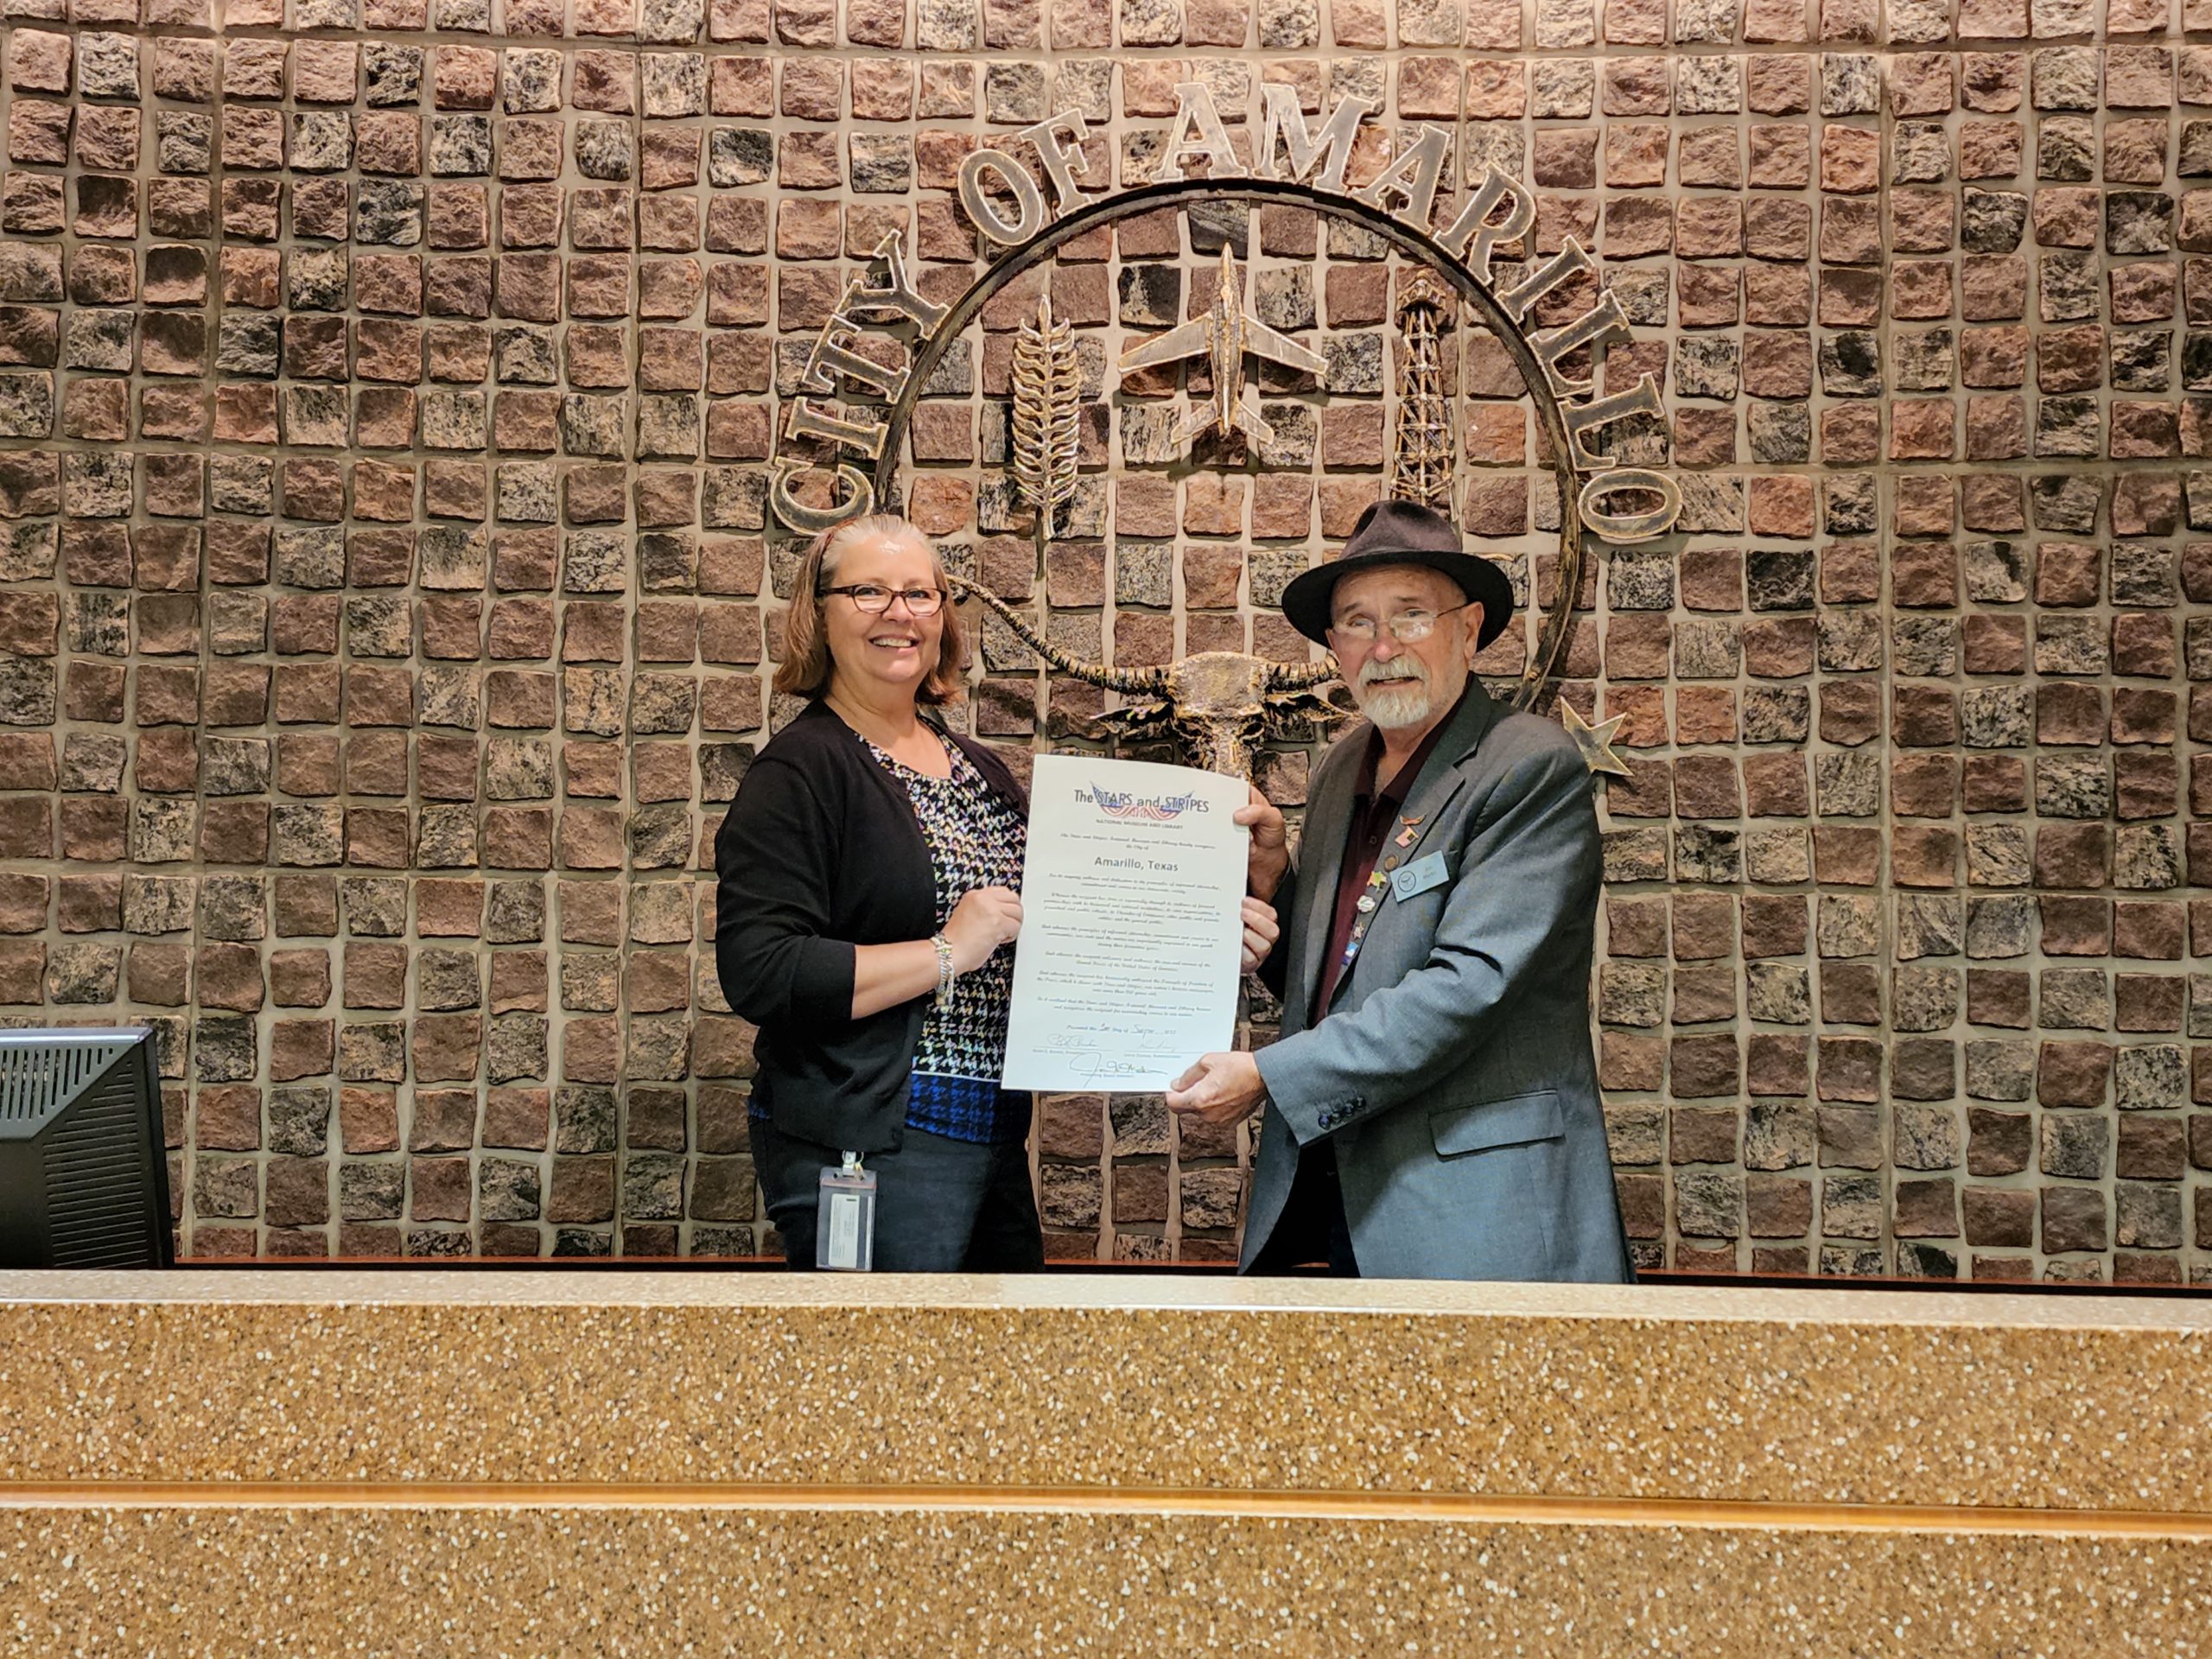 On Thursday, September 1, 2022, Jim Martin presented the Stars and Stripes City Proclamation to Amarillo, Texas which was accepted by Donna Savage.